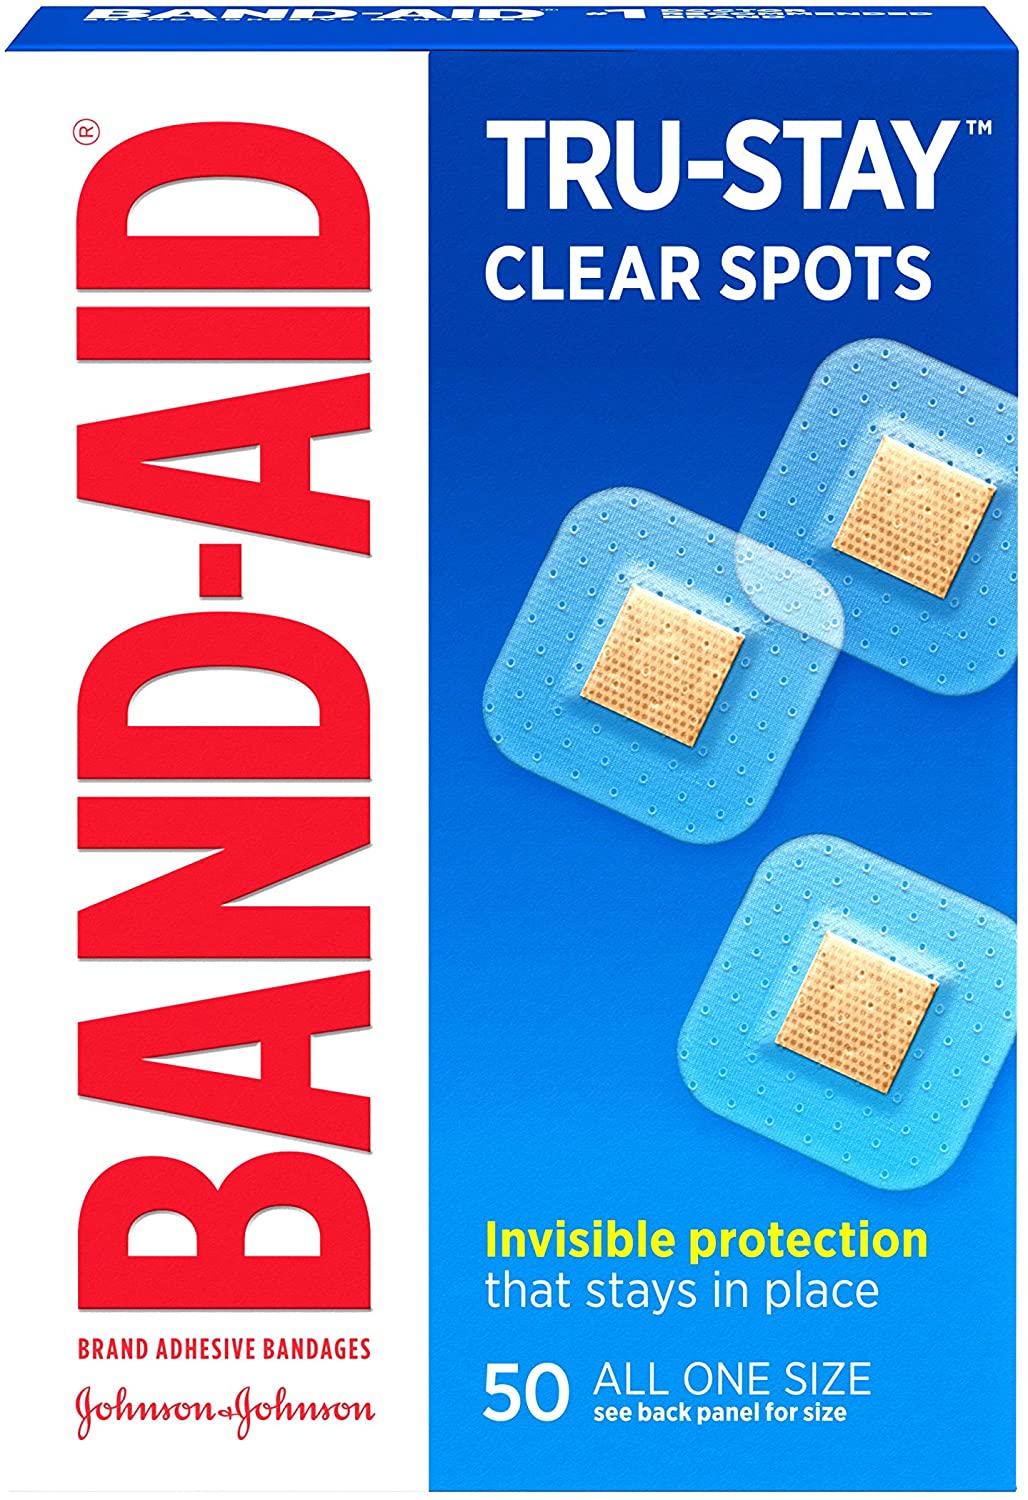 50-Count Band-Aid Tru-Stay Clear Spot Bandages (All One Size) $1.70 w/ S&S + Free Shipping w/ Prime or on $25+